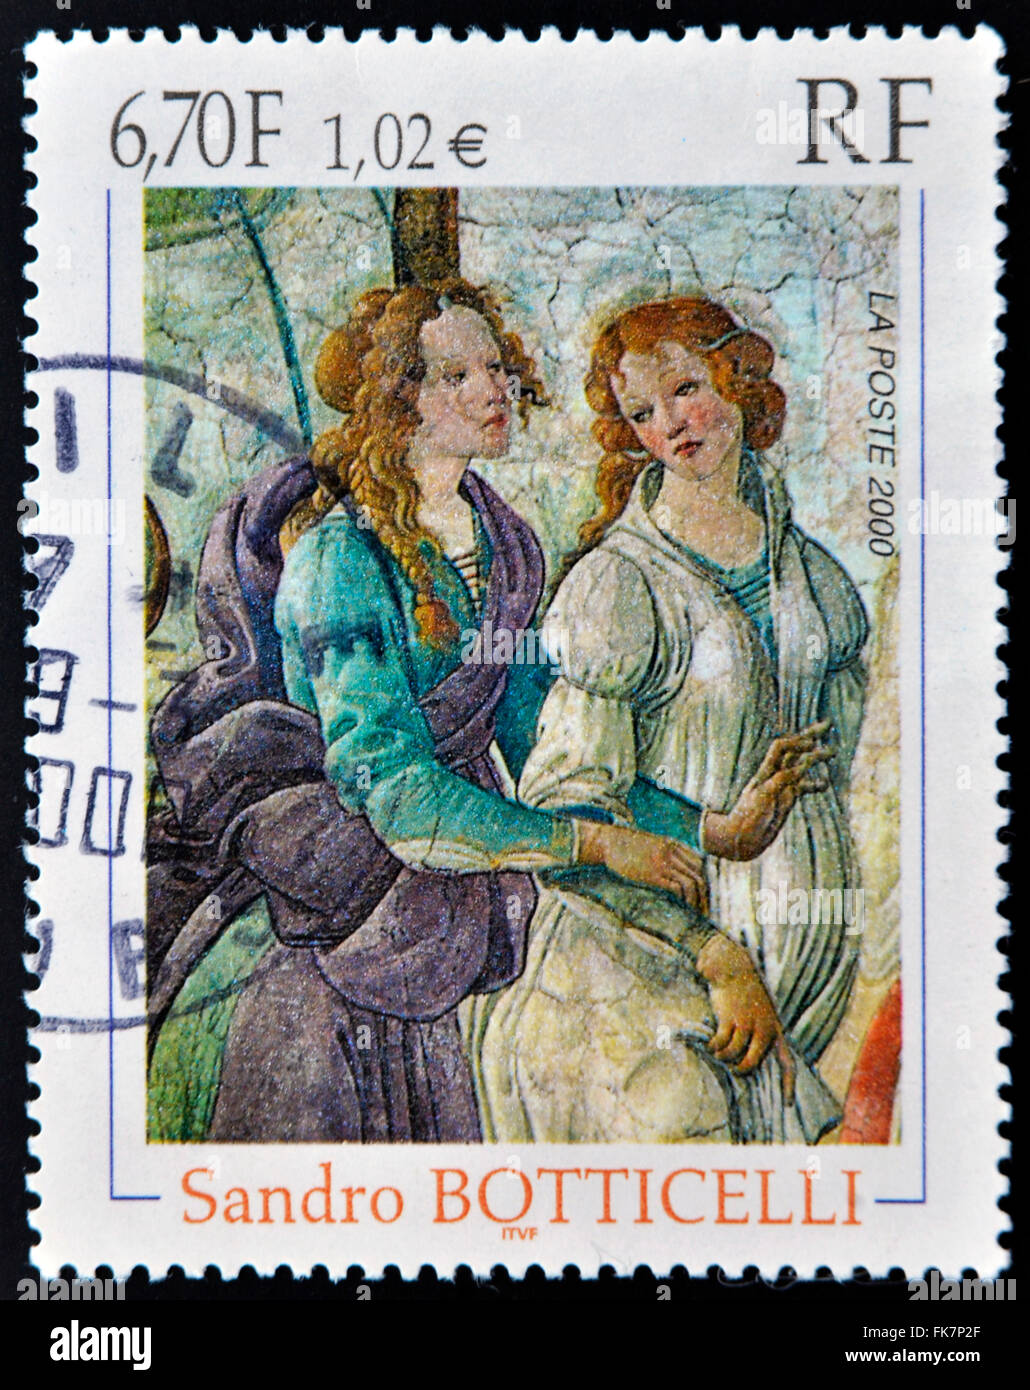 FRANCE - CIRCA 2000: A stamp printed in France shows Detail of Venus and The Three Graces by Sandro Botticelli Stock Photo